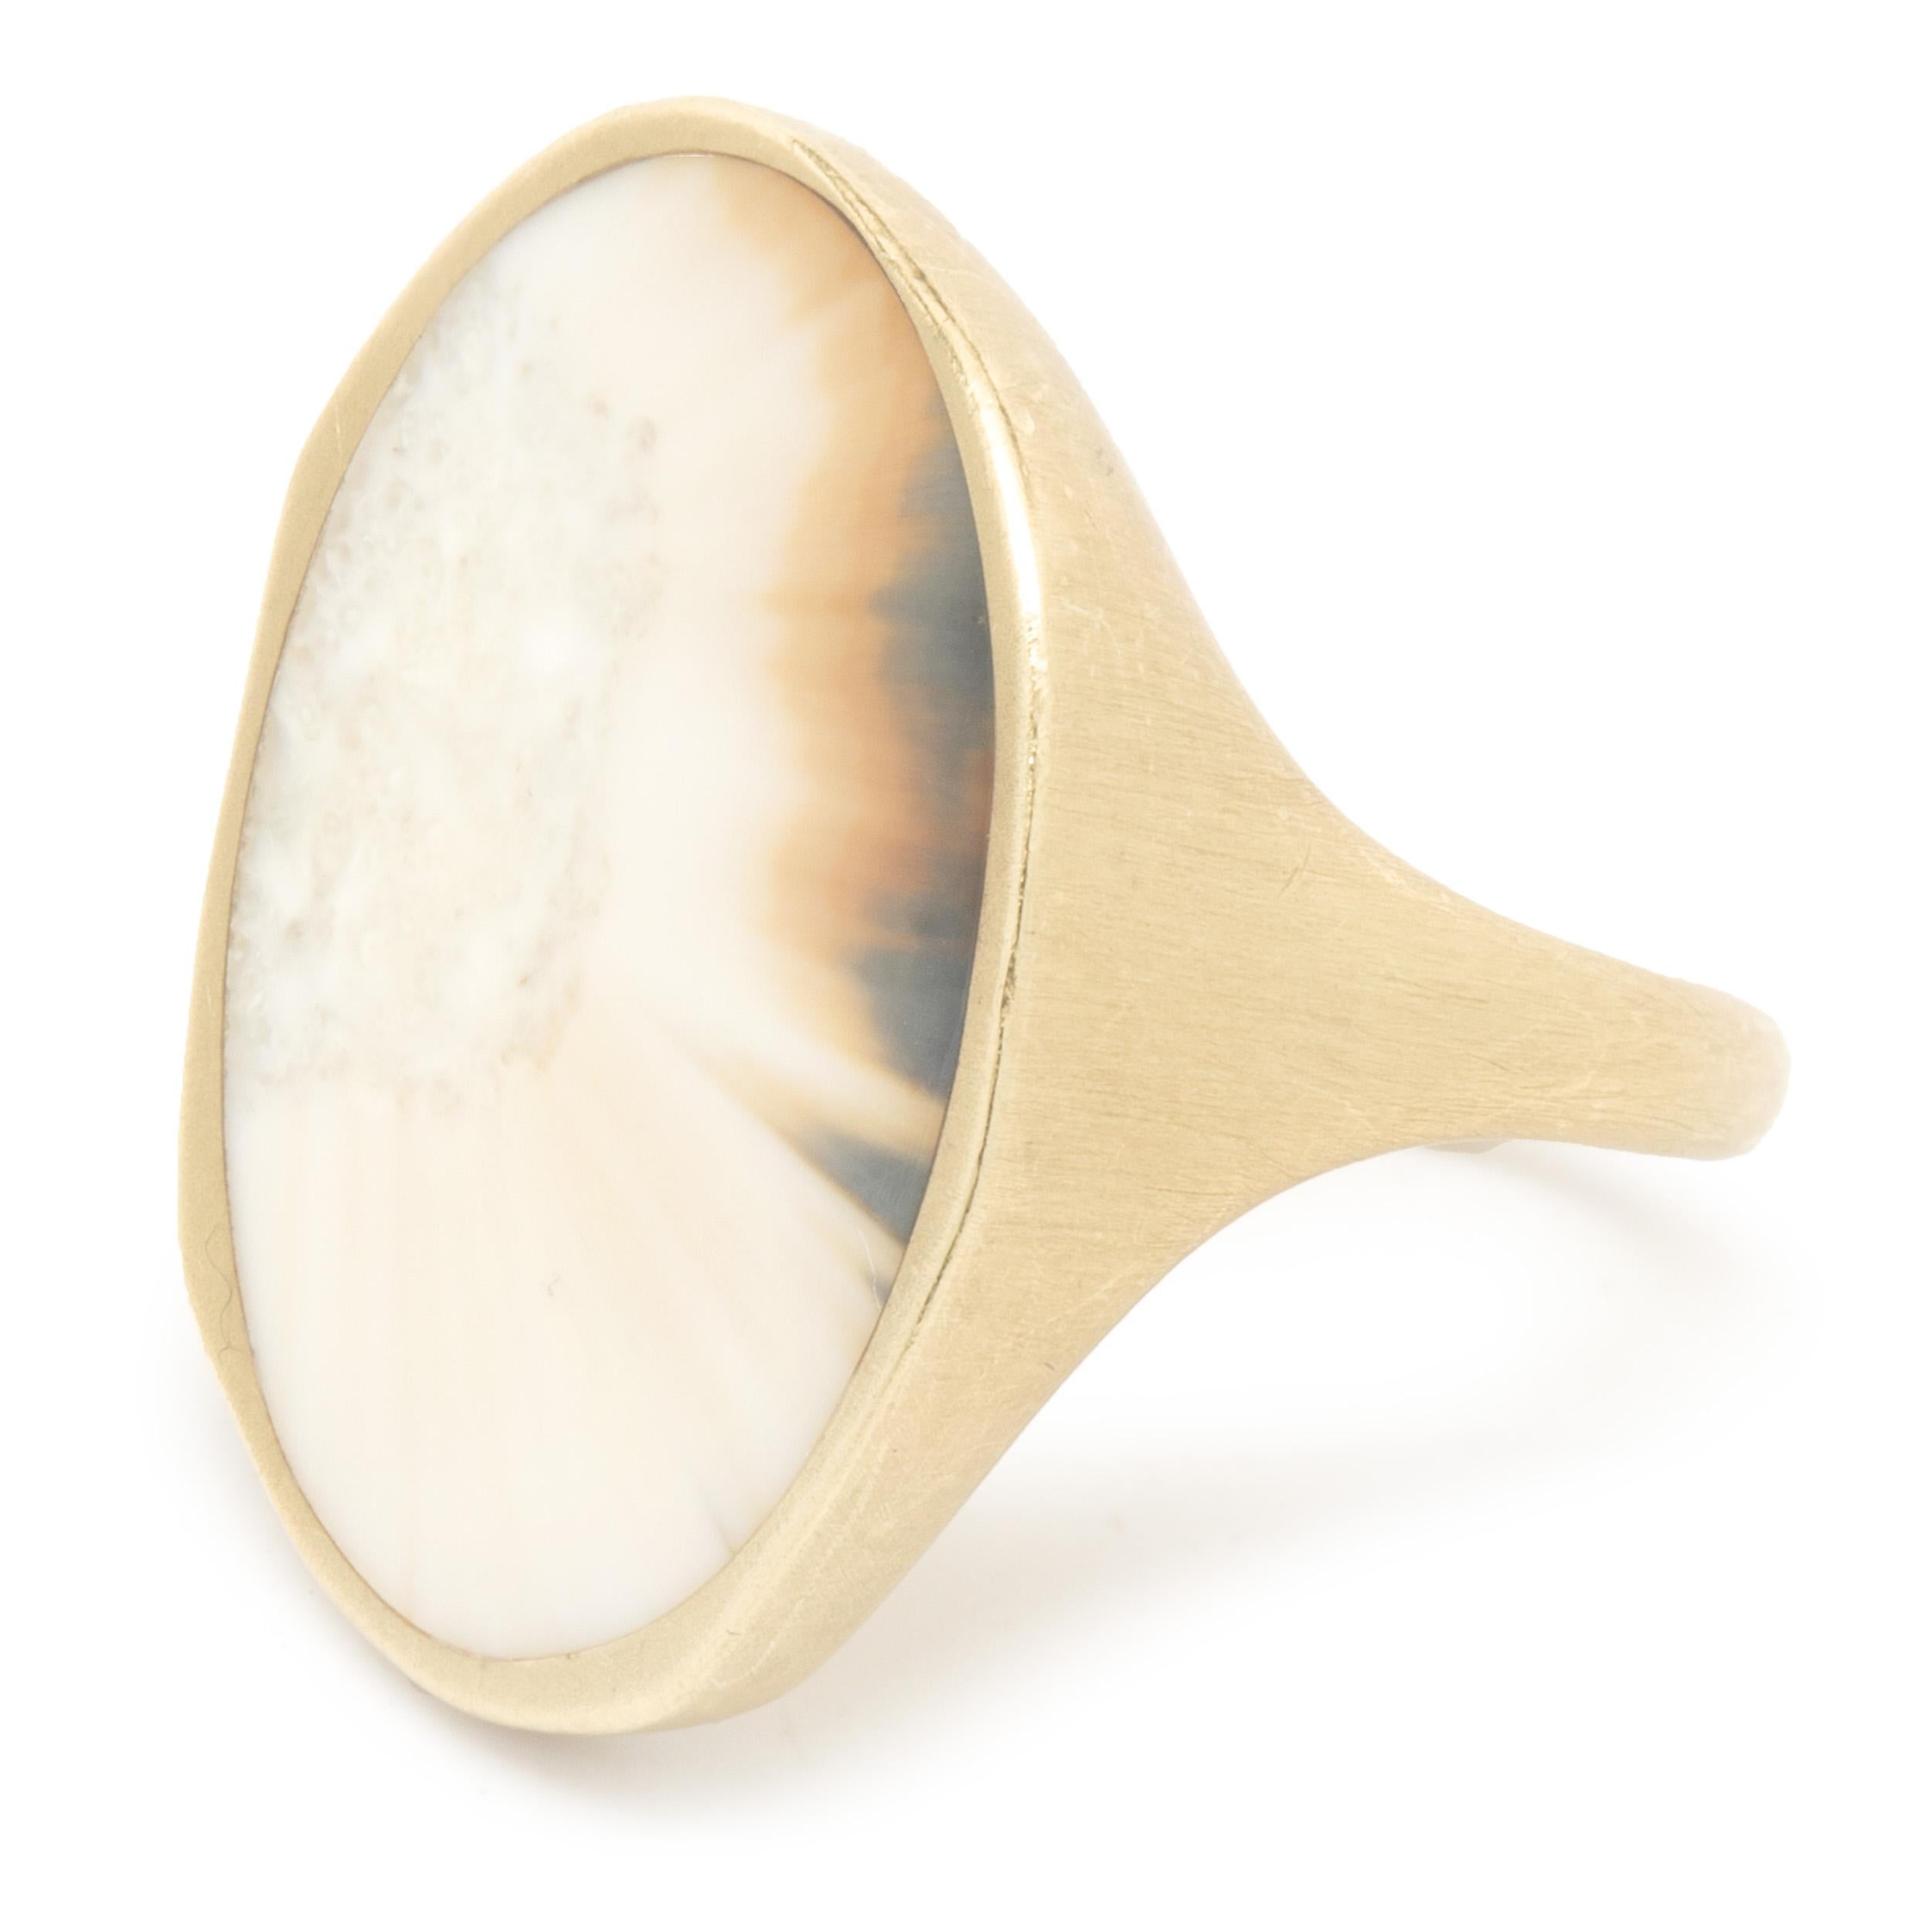 Designer: Monique Pean
Material: 18K yellow gold
Dimensions: ring top measures 24.50mm wide
Ring Size: 6.5 (complimentary sizing available)
Weight: 10.50 grams